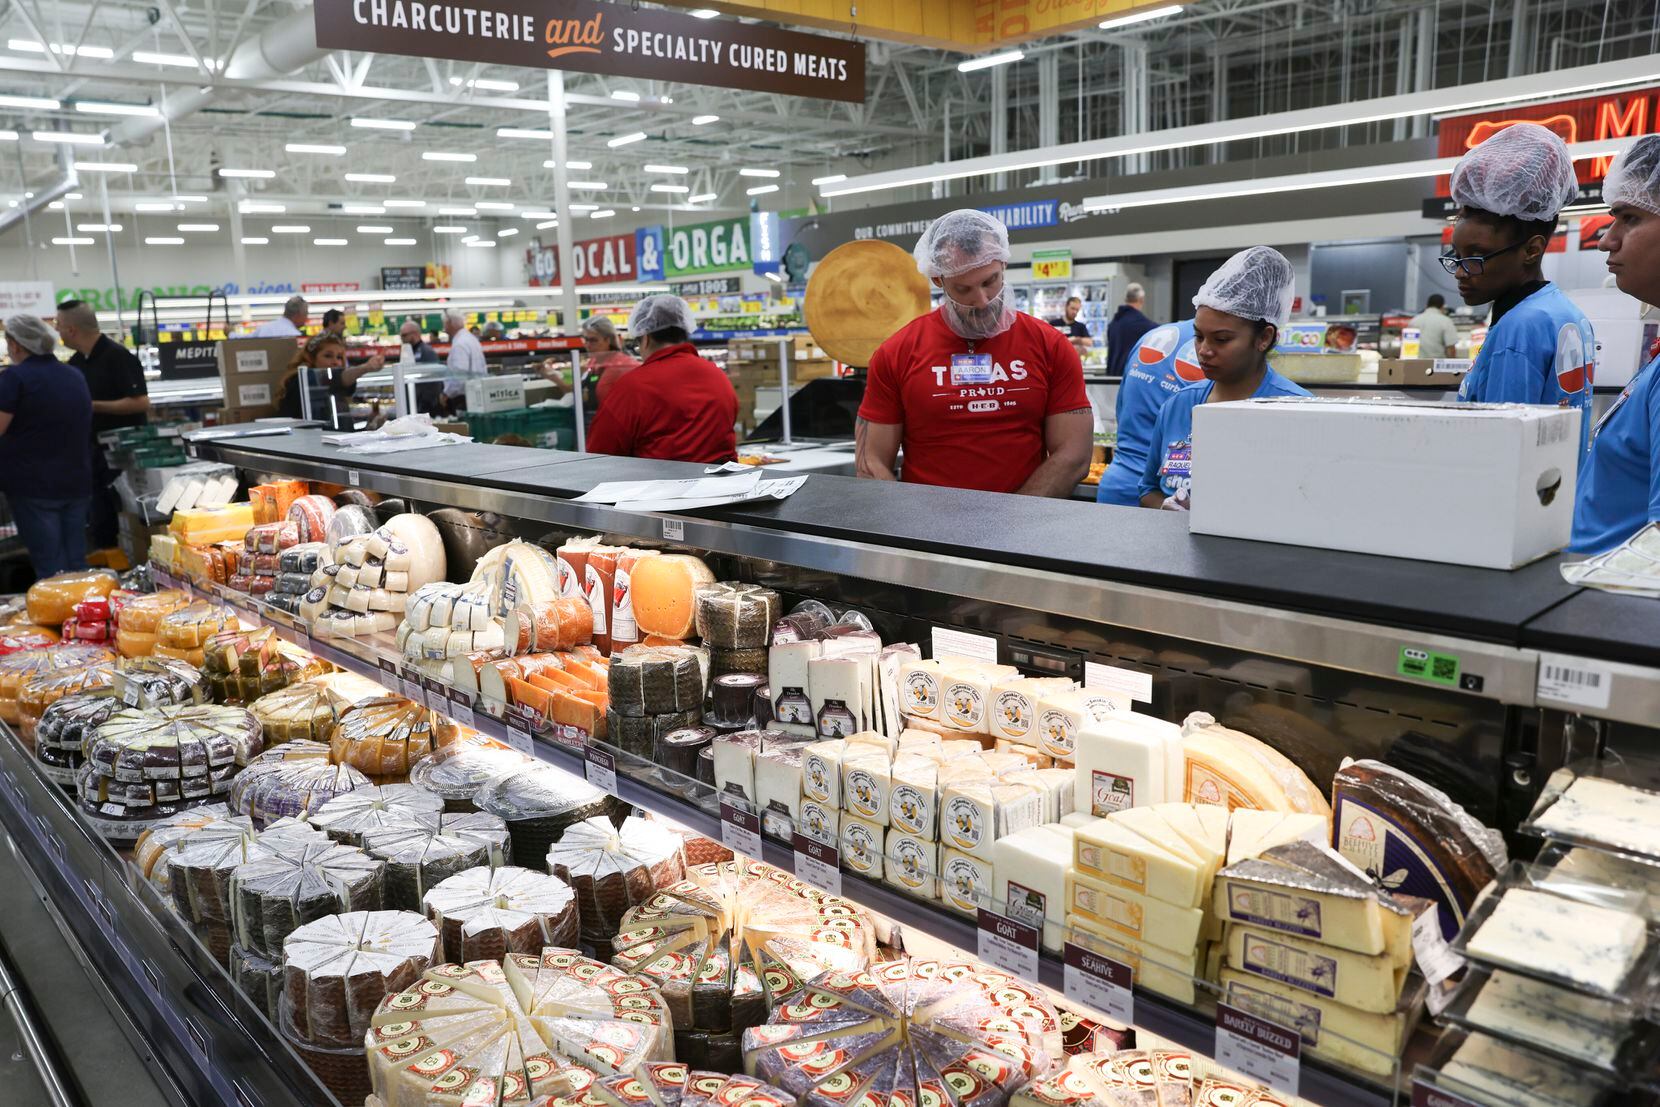 H-E-B's new Plano store has 250 different cheeses. It opens Wednesday at 6 a.m.